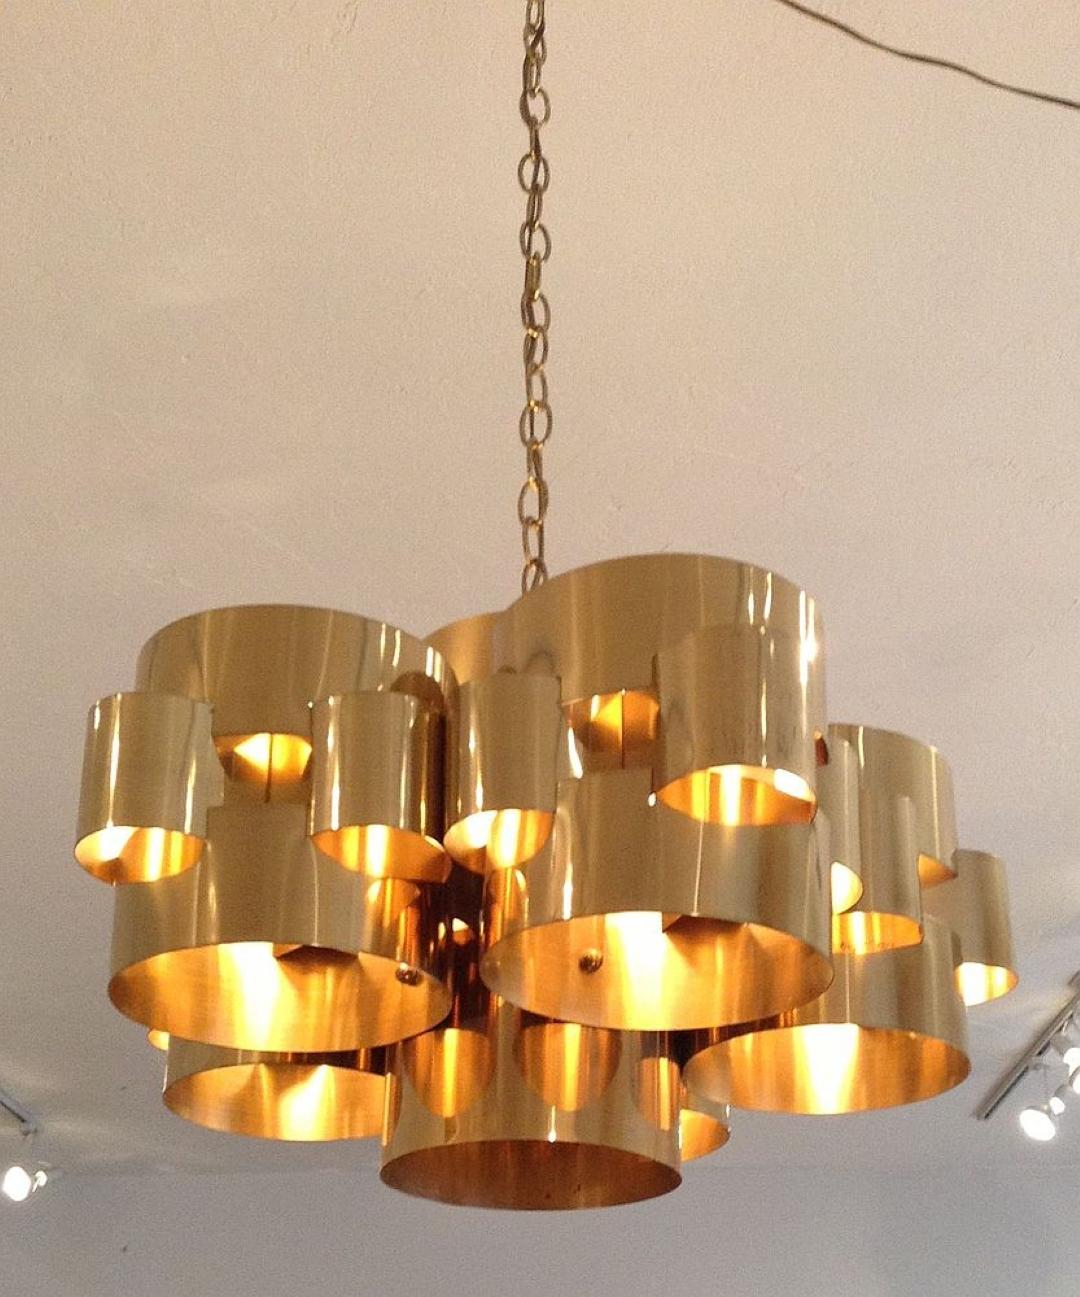 Polished brass chandelier composed of one central long cylinder flanked by five interlocking cylinders. Designed and signed by the great American mid-century designer Curtis Jere, circa 1975. 24